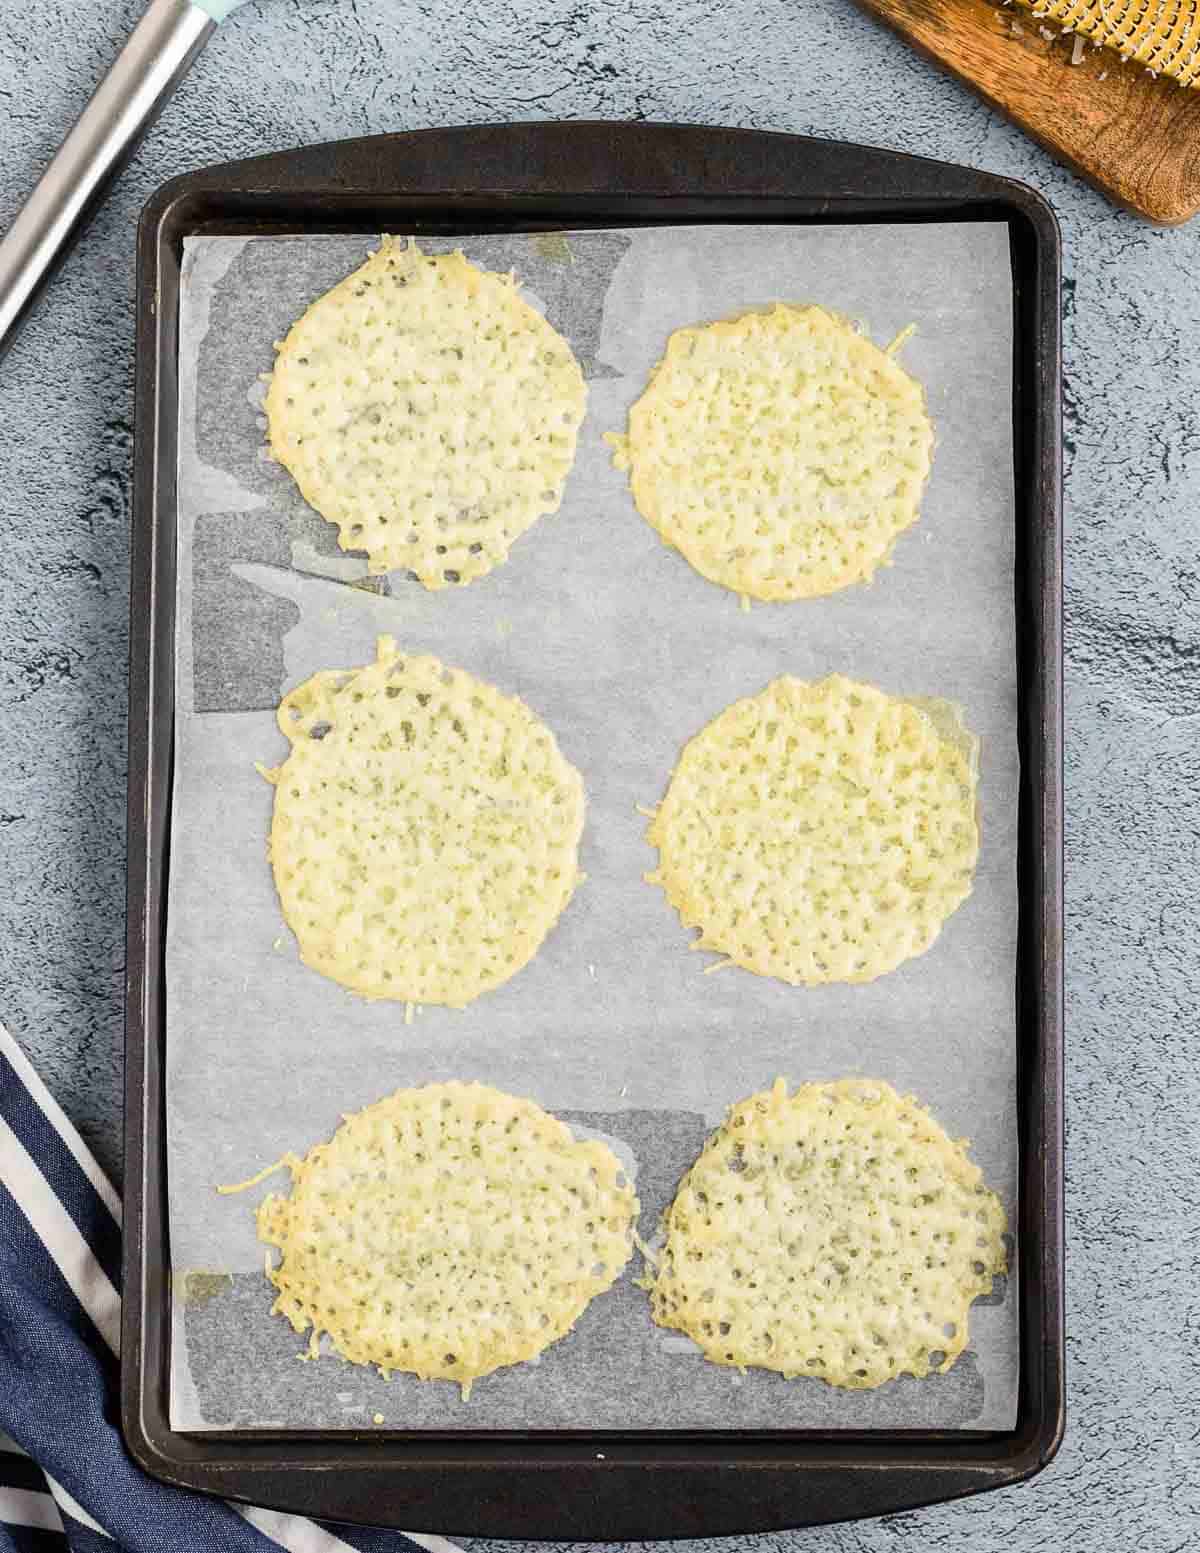 A baking sheet lined with parchment paper and baked parmesan crisp circles on it.